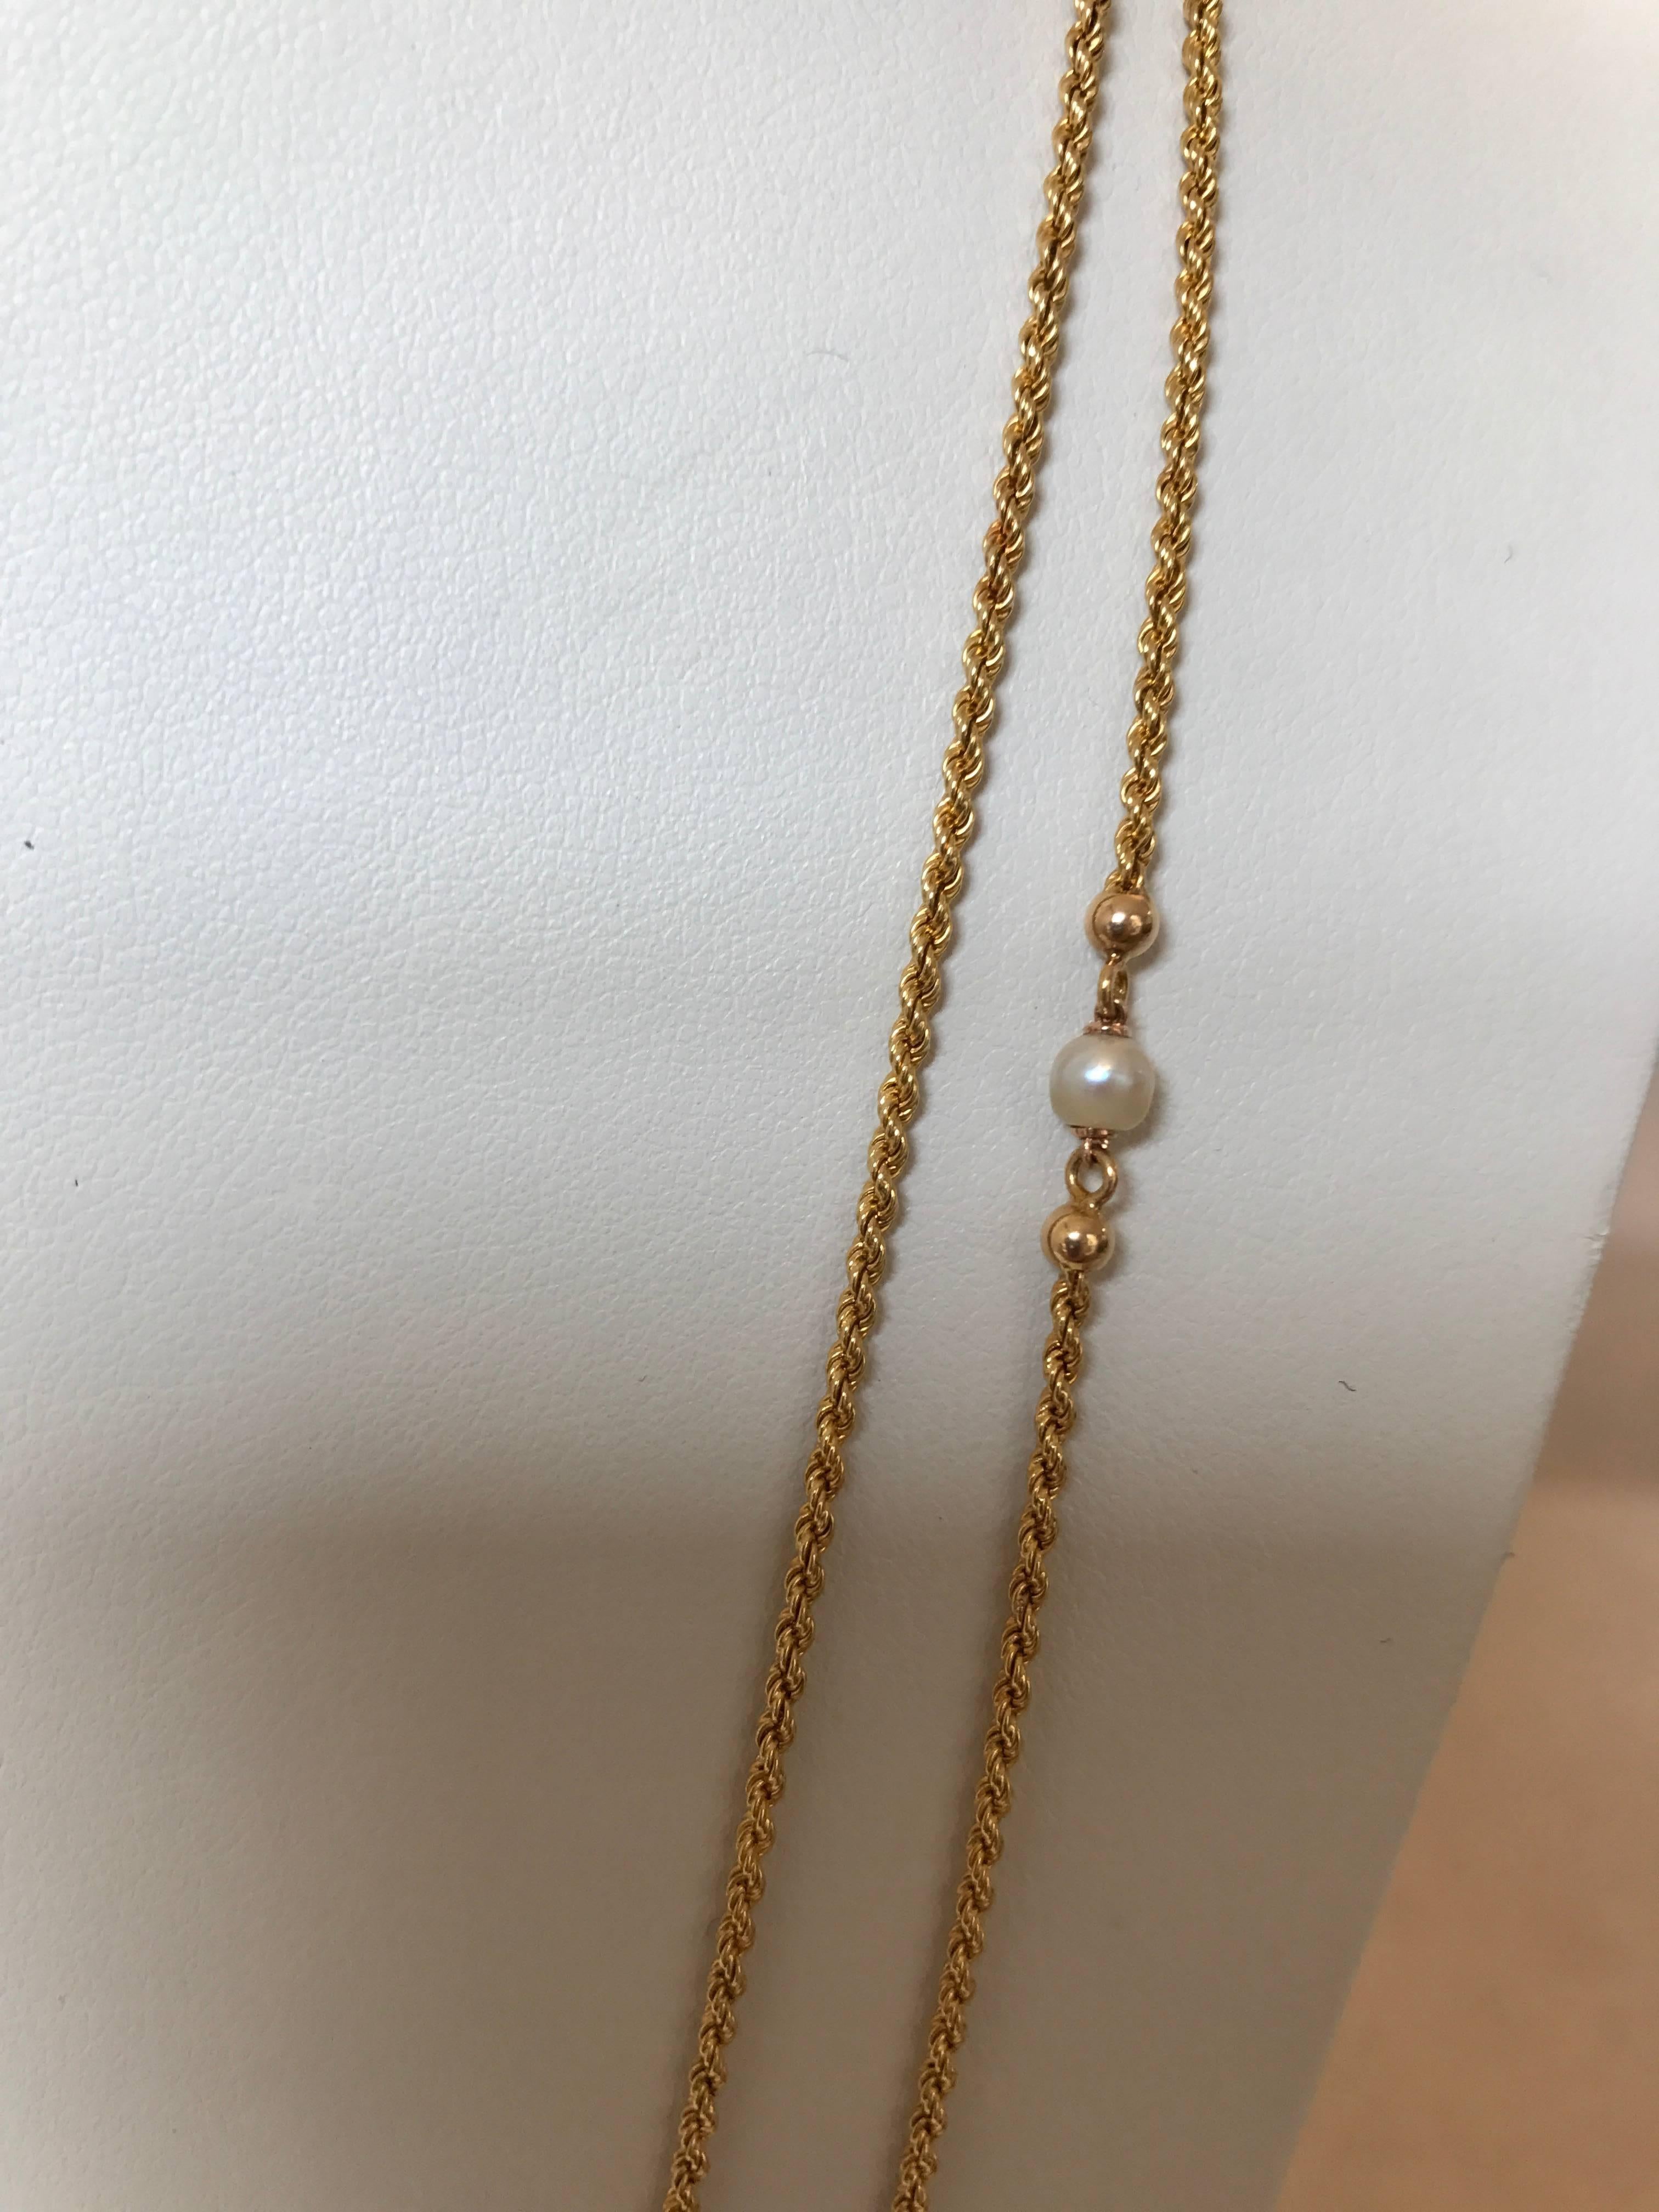 Victorian Antique French 18 Karat Yellow Gold Pearl Long Chain Necklace, circa 1870 For Sale